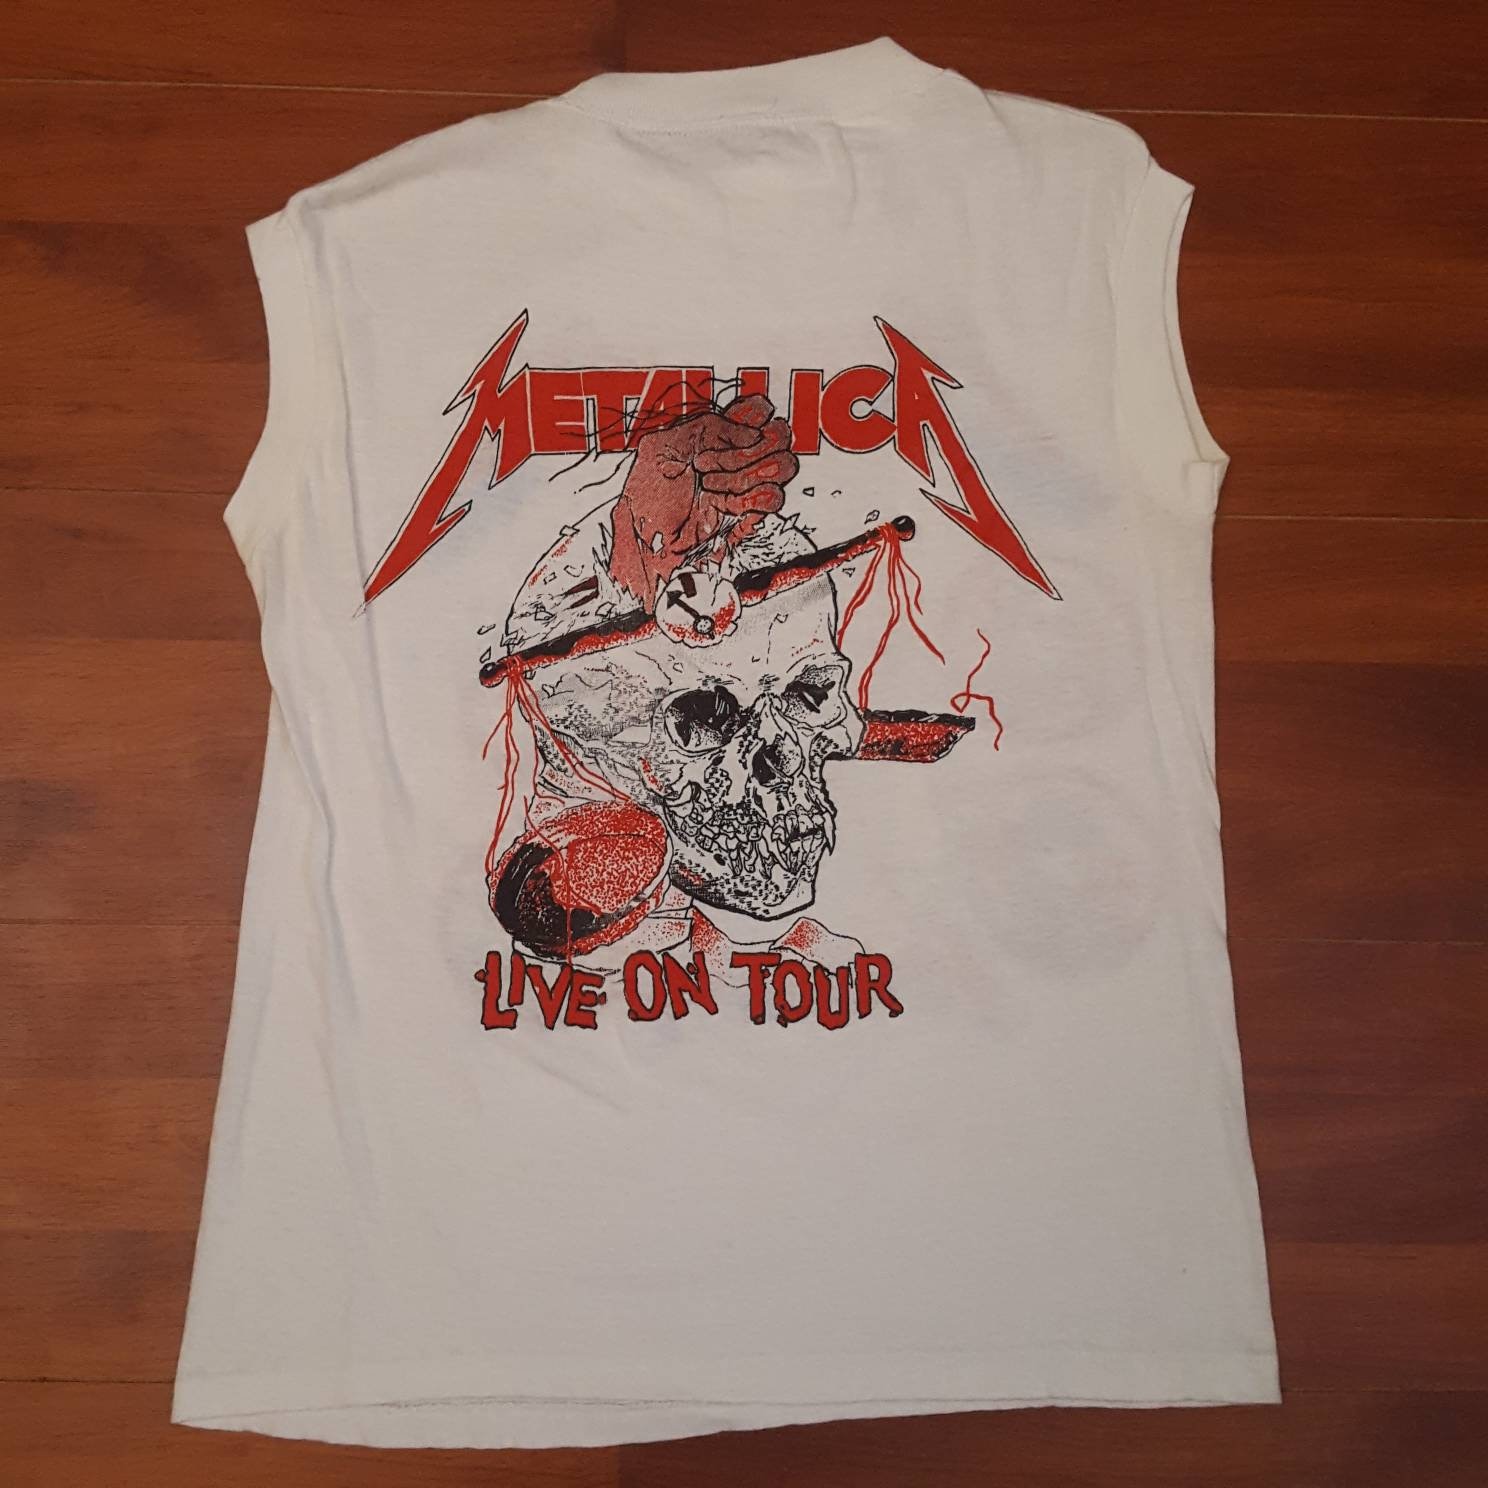 1988 Metallica Live on Tour and Justice for All Women's -  Denmark